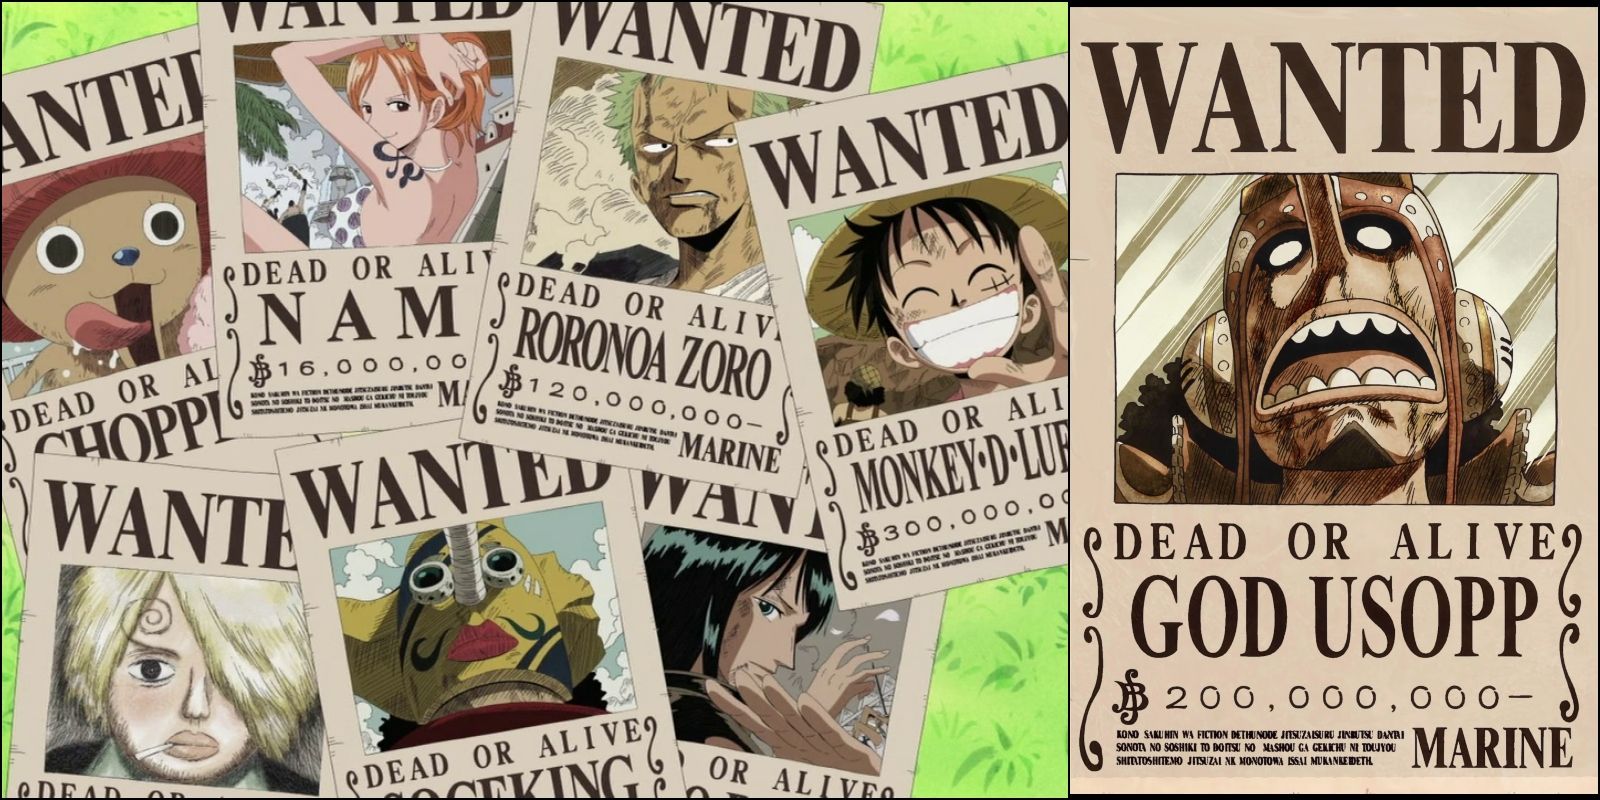 How does the One piece Bounty system work? - Anime & Manga Stack